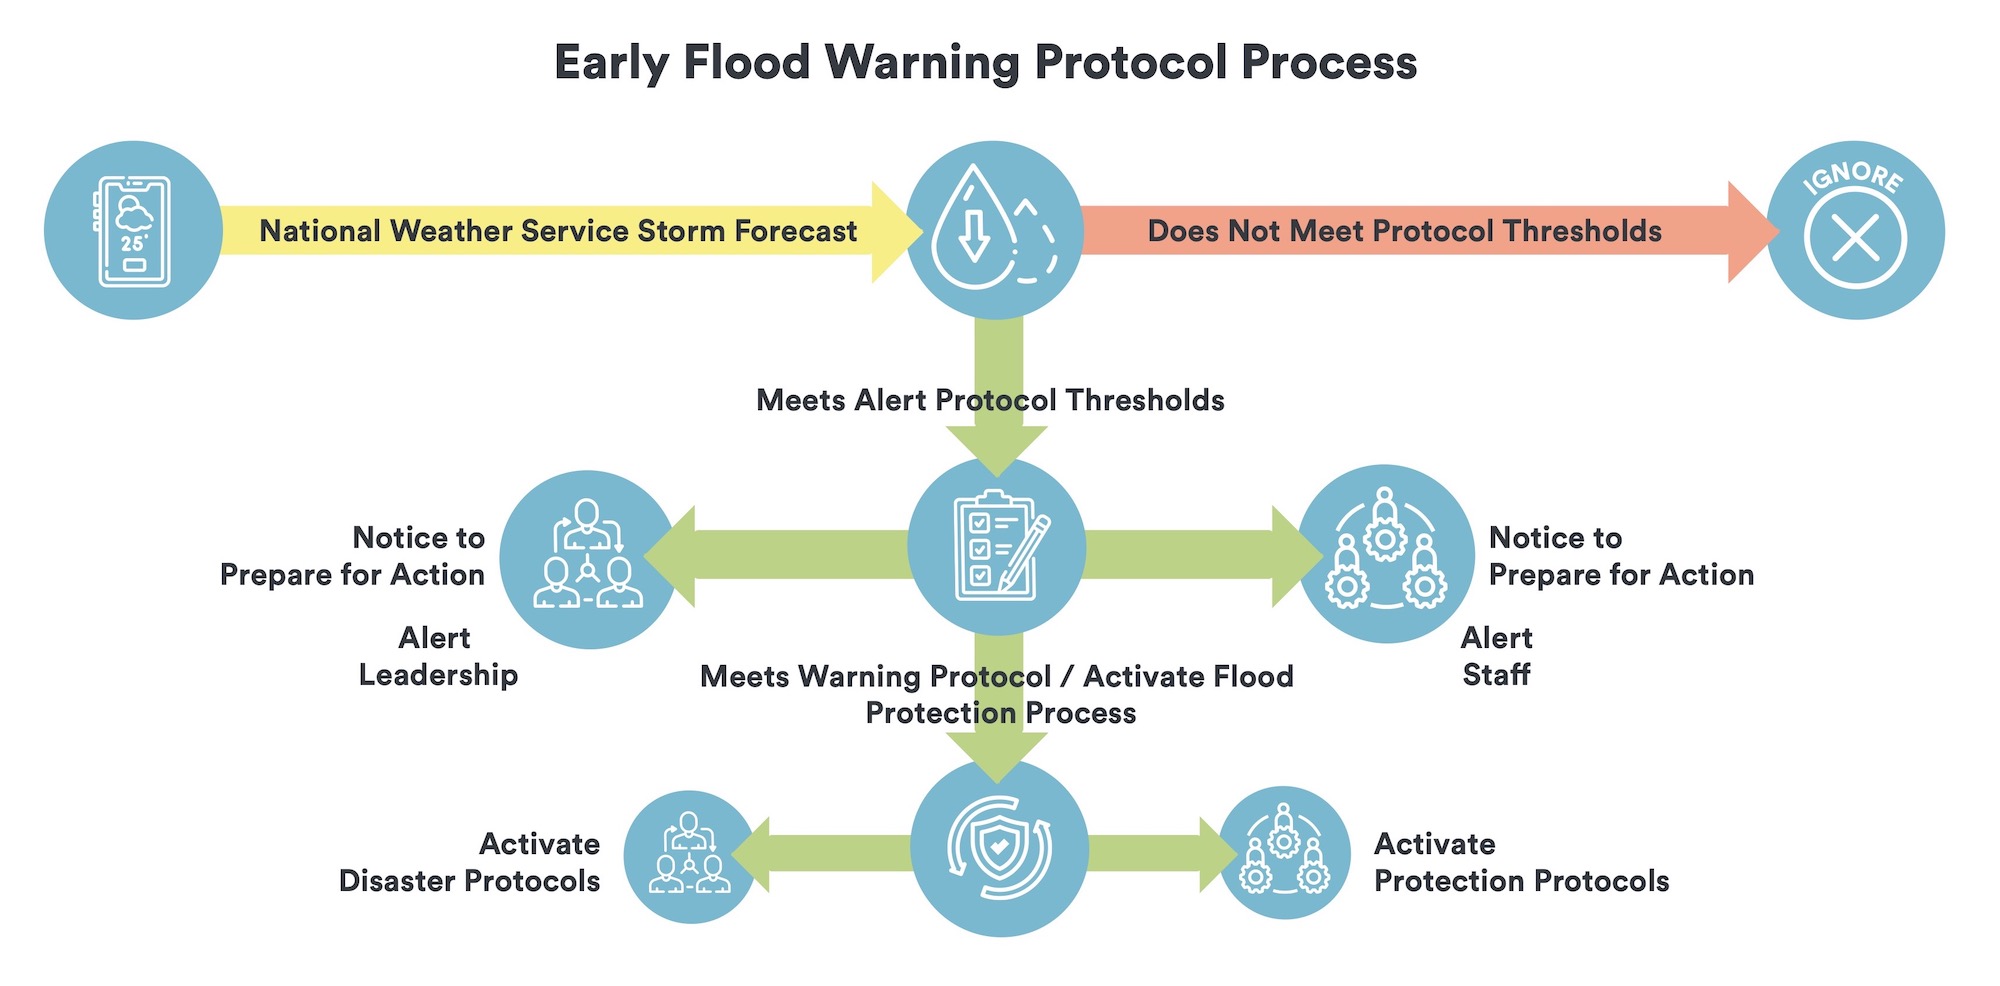 A key element of any active flood protection system is the linkage of a flood warning system to a documented engineering protocol 